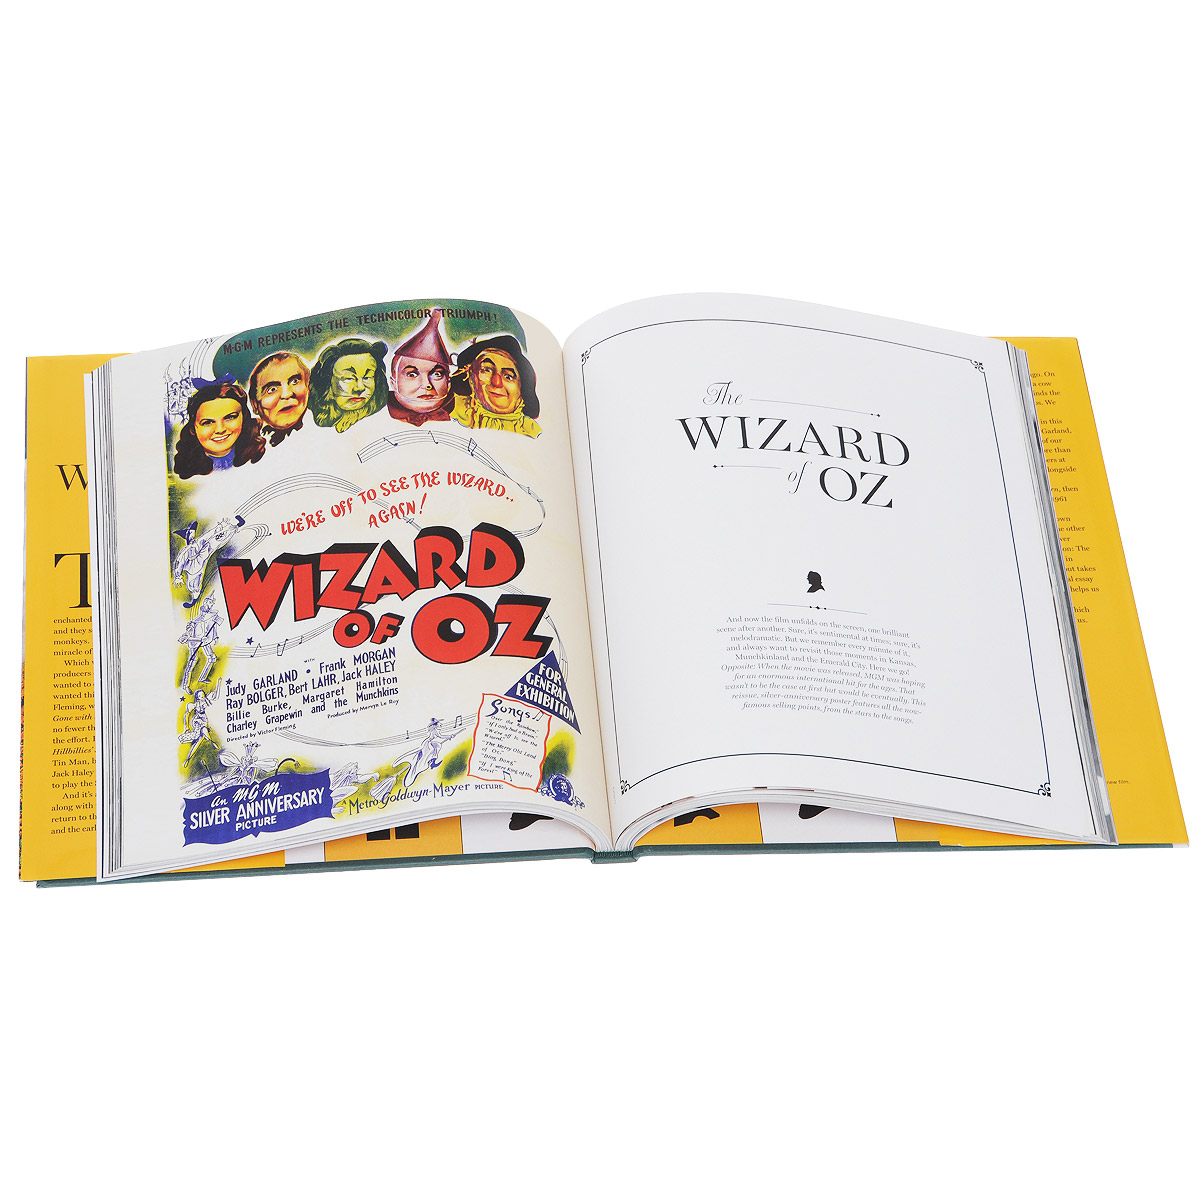 Life the Wizard of Oz: 75 Years Along the Yellow Brick Road